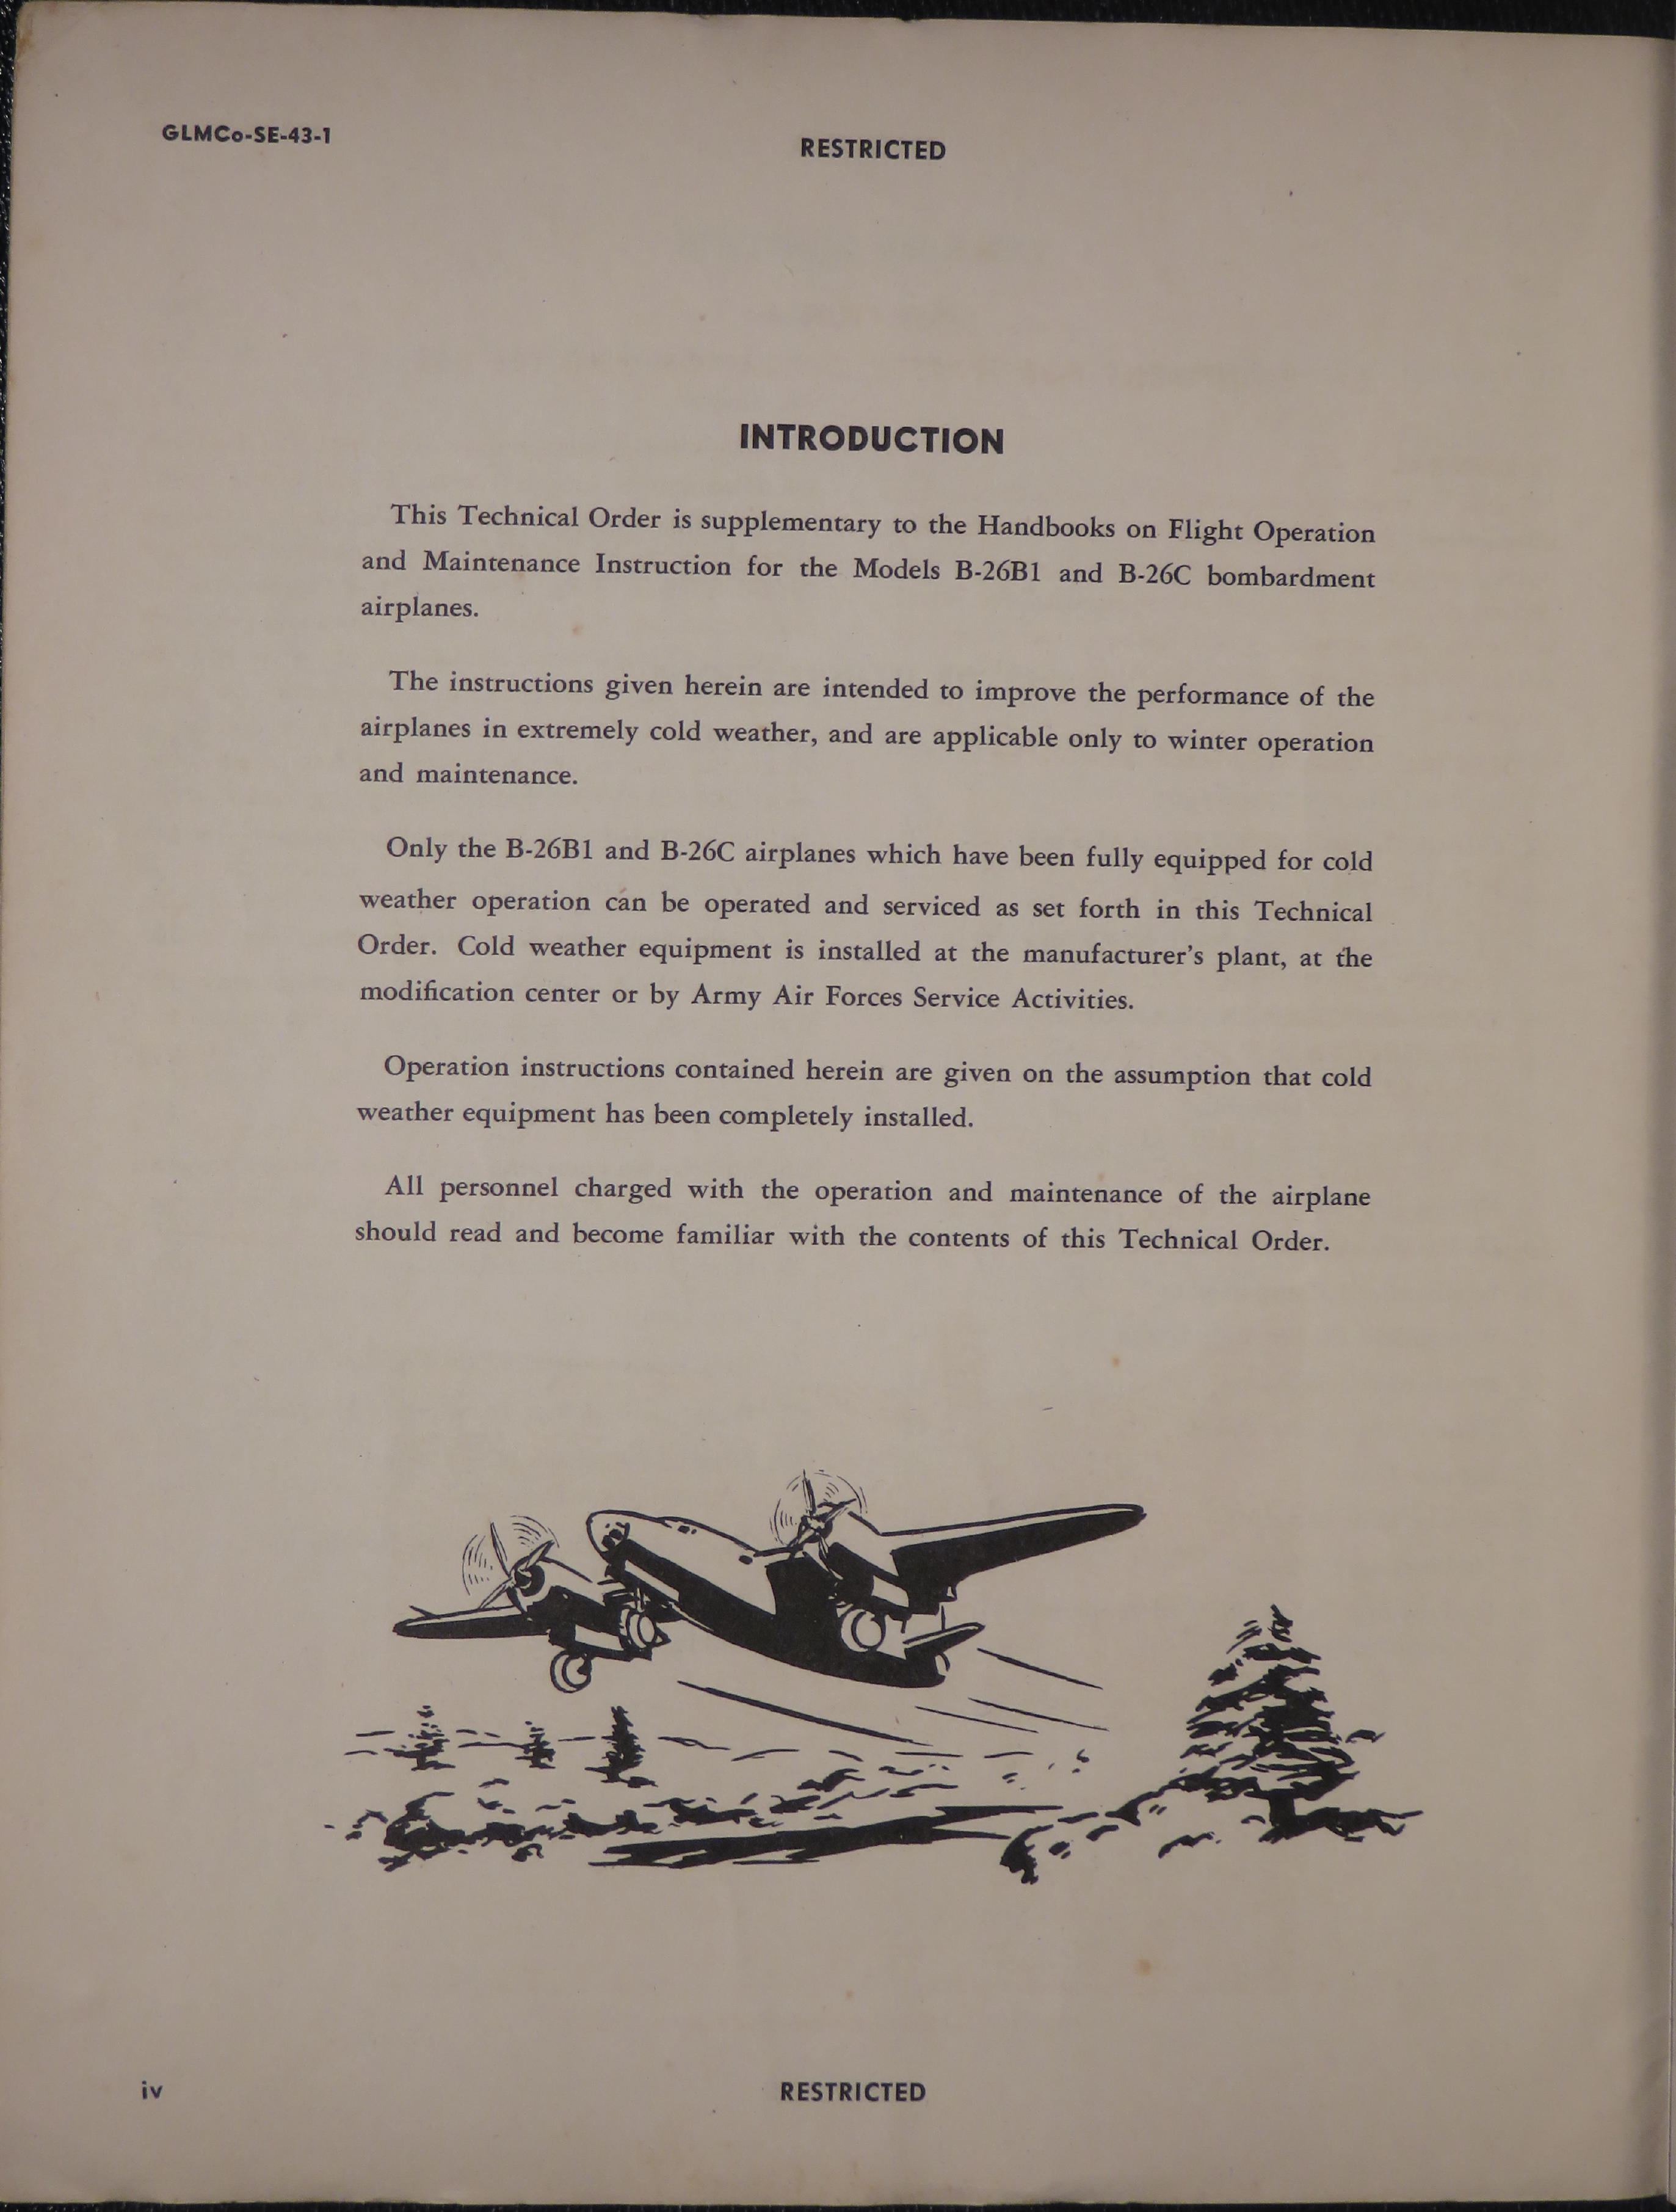 Sample page 8 from AirCorps Library document: Handbook of Cold Weather Equipment Operation and Service for the B-26B1 and B-26C Airplanes